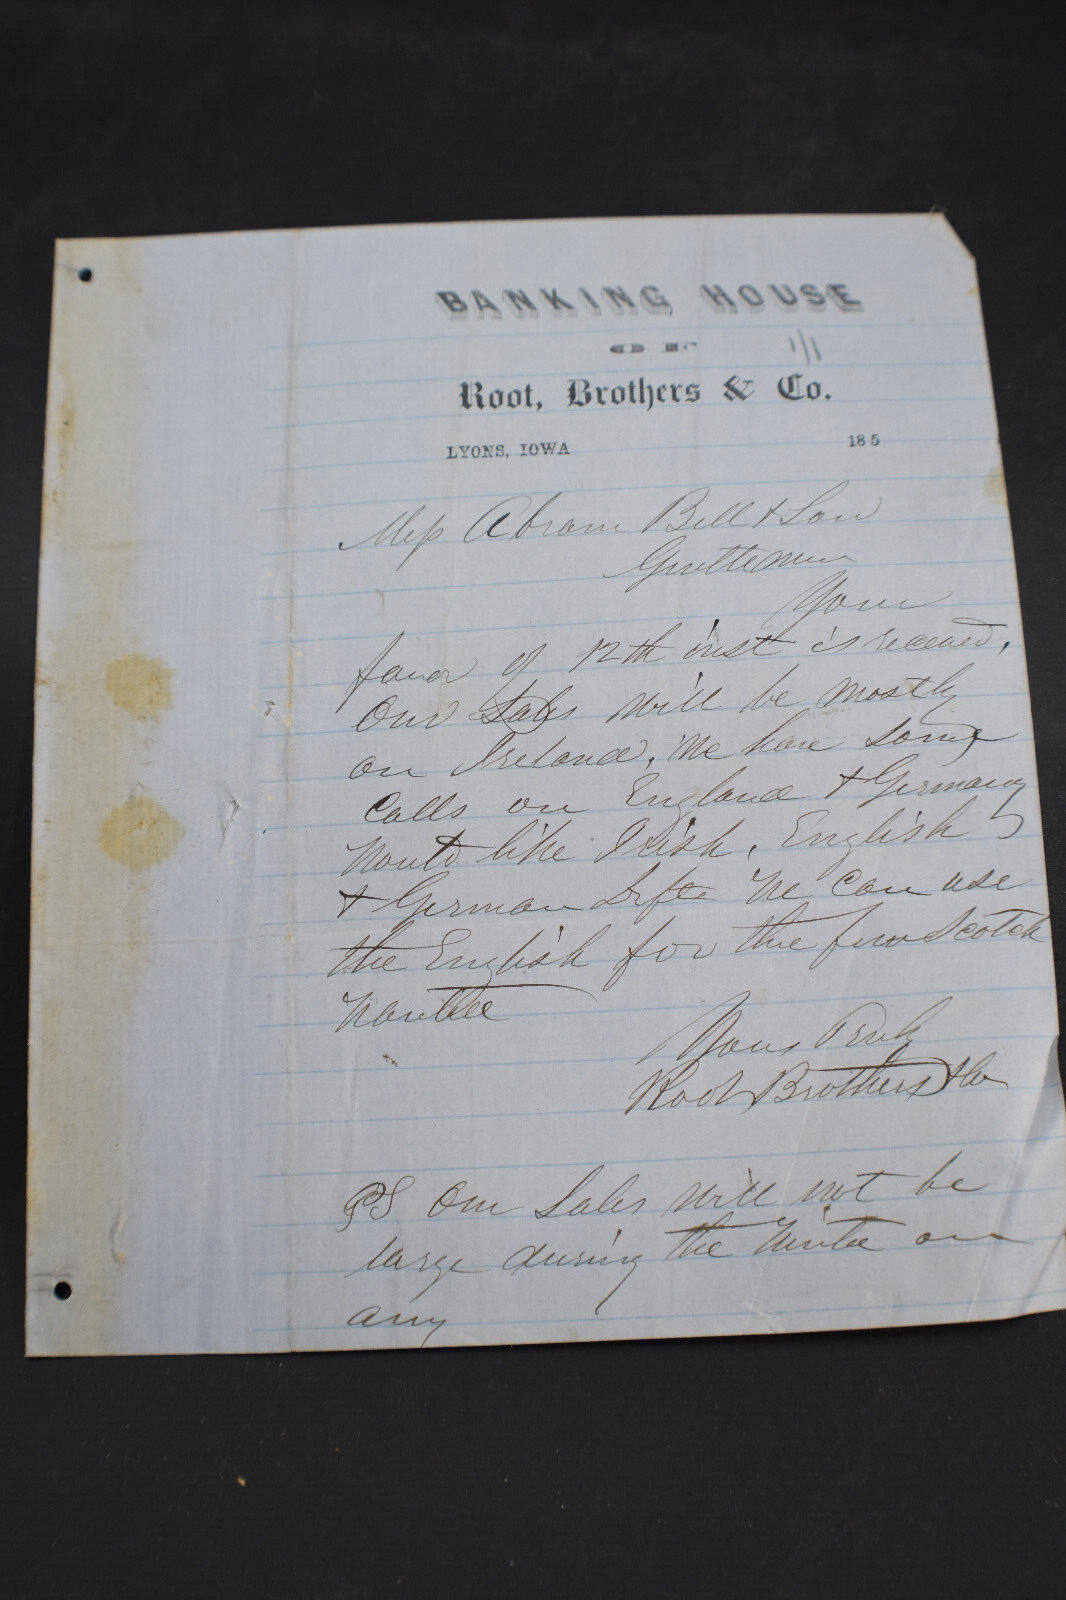 ~1854 Banking House of Root, Brothers & Co, Lyon, Iowa Letter to Abraham Bell